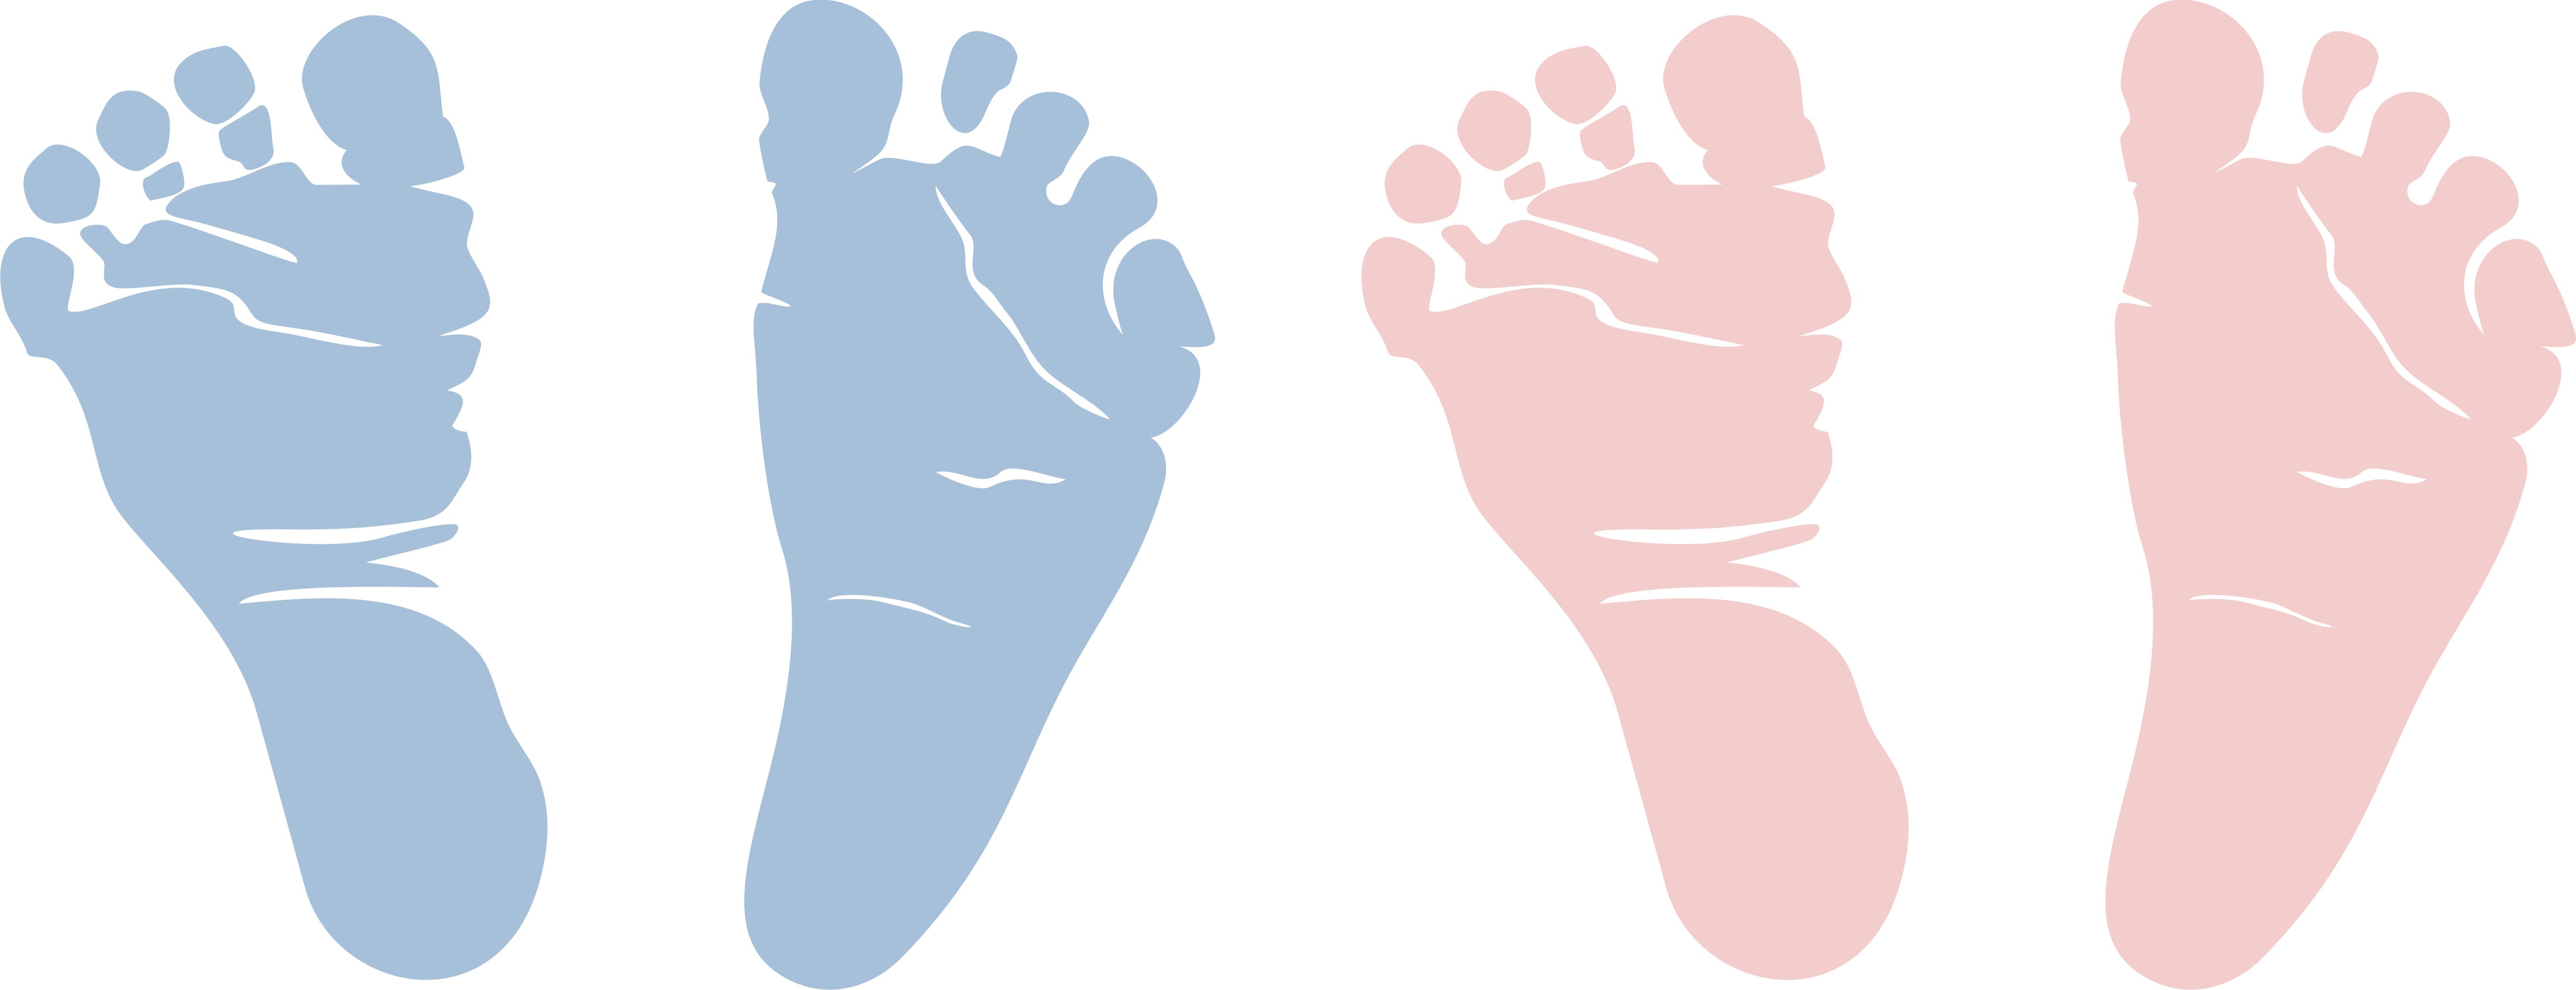 Baby Feet Silhouette Baby Footprints Baby Feet Clipart Baby Feet Baby The Best Porn Website